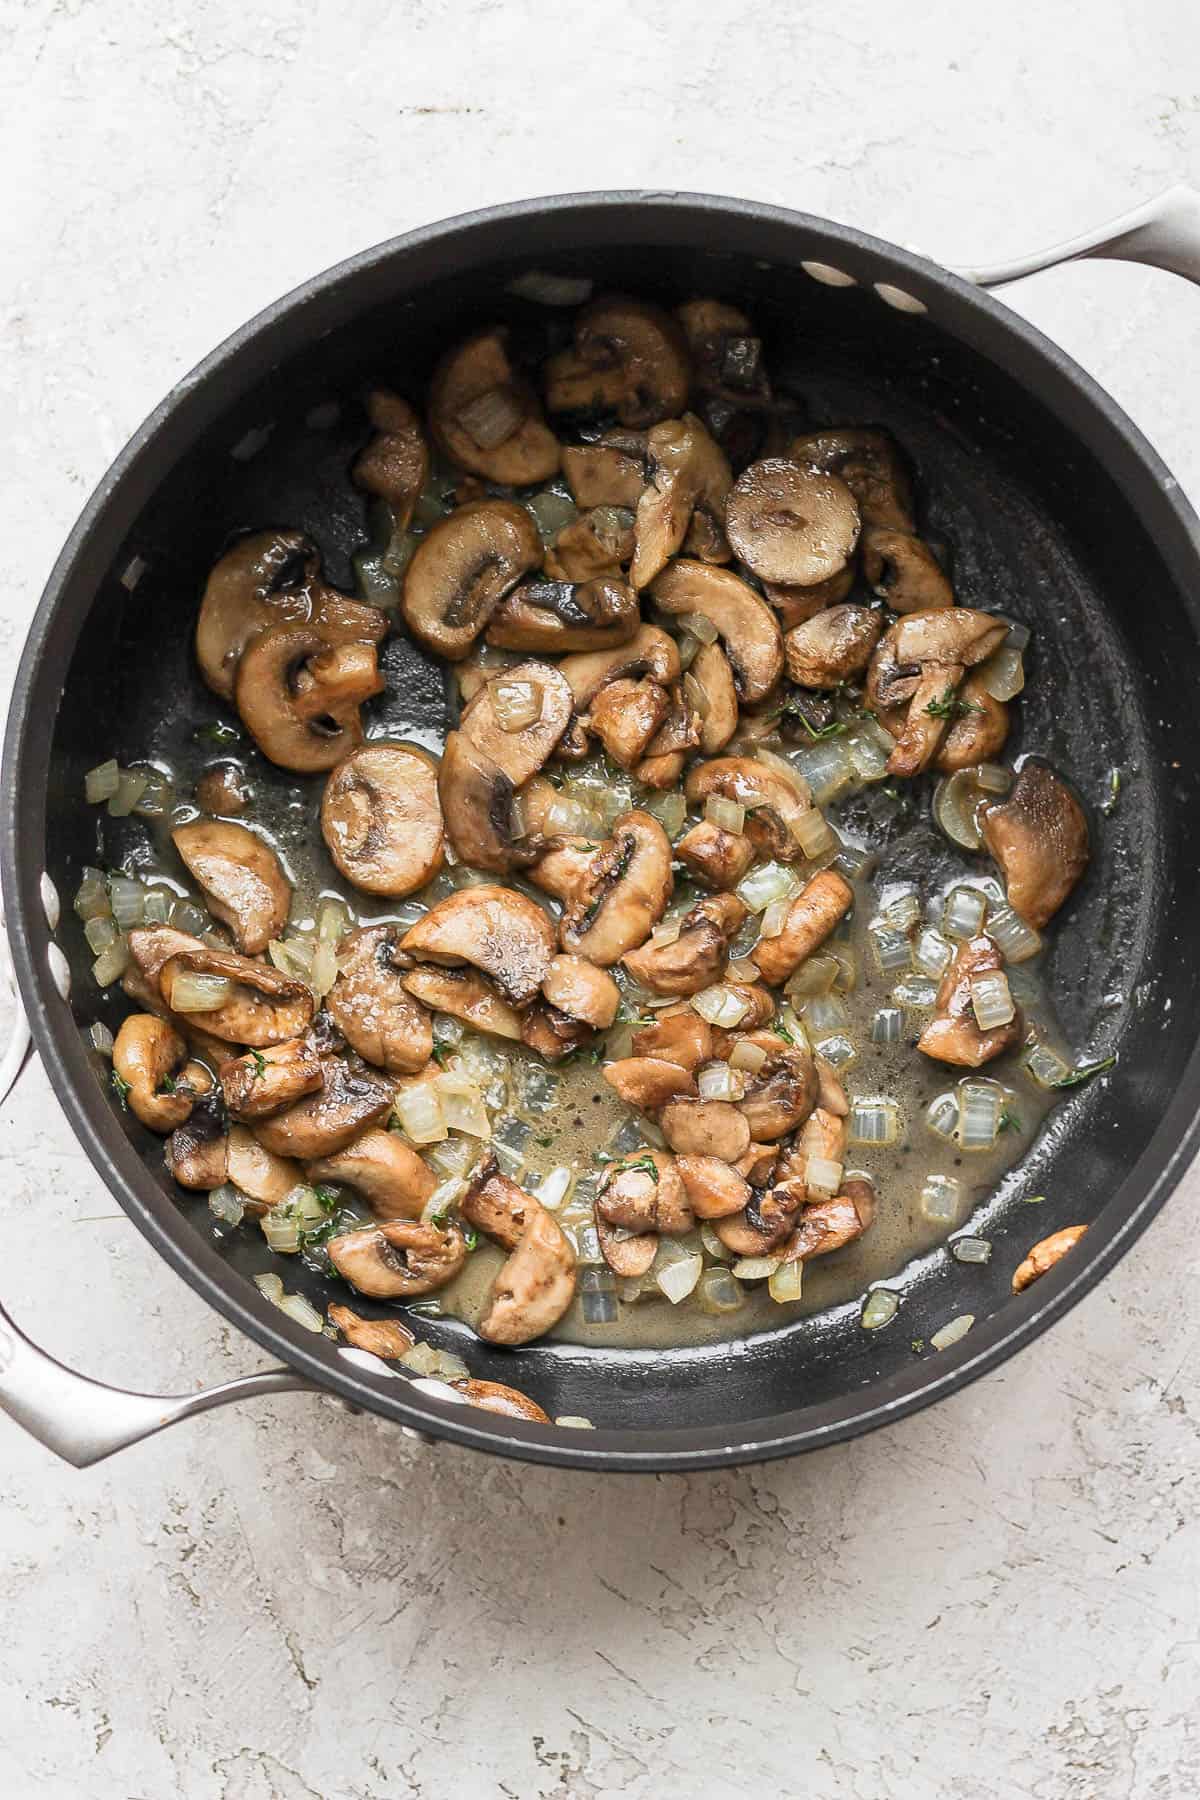 Cooked down mushrooms and onions in a pot.